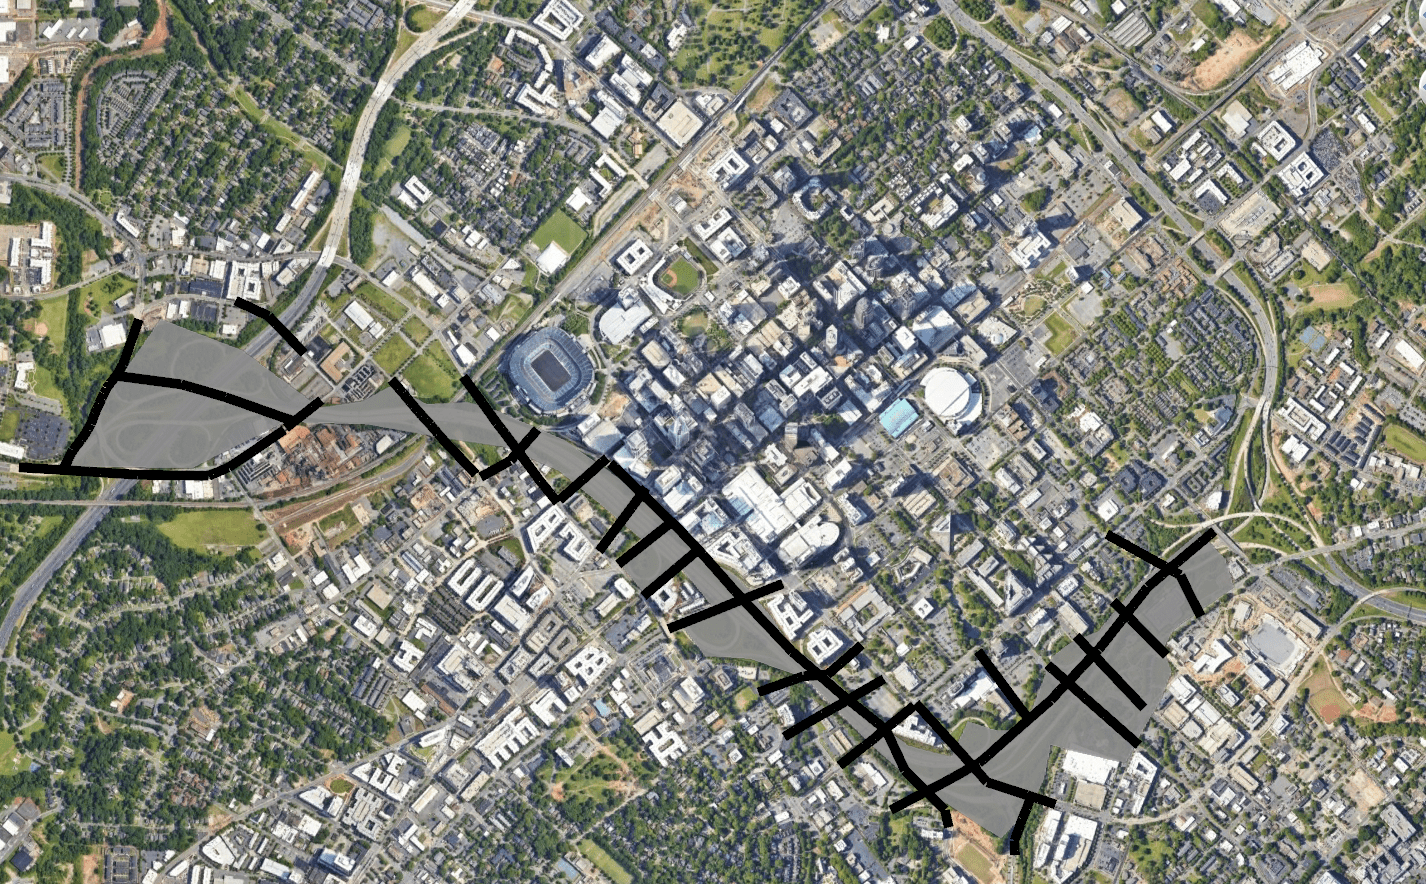 Rendering of potential new grid structure with the removal of I-277 – GoogleEarth